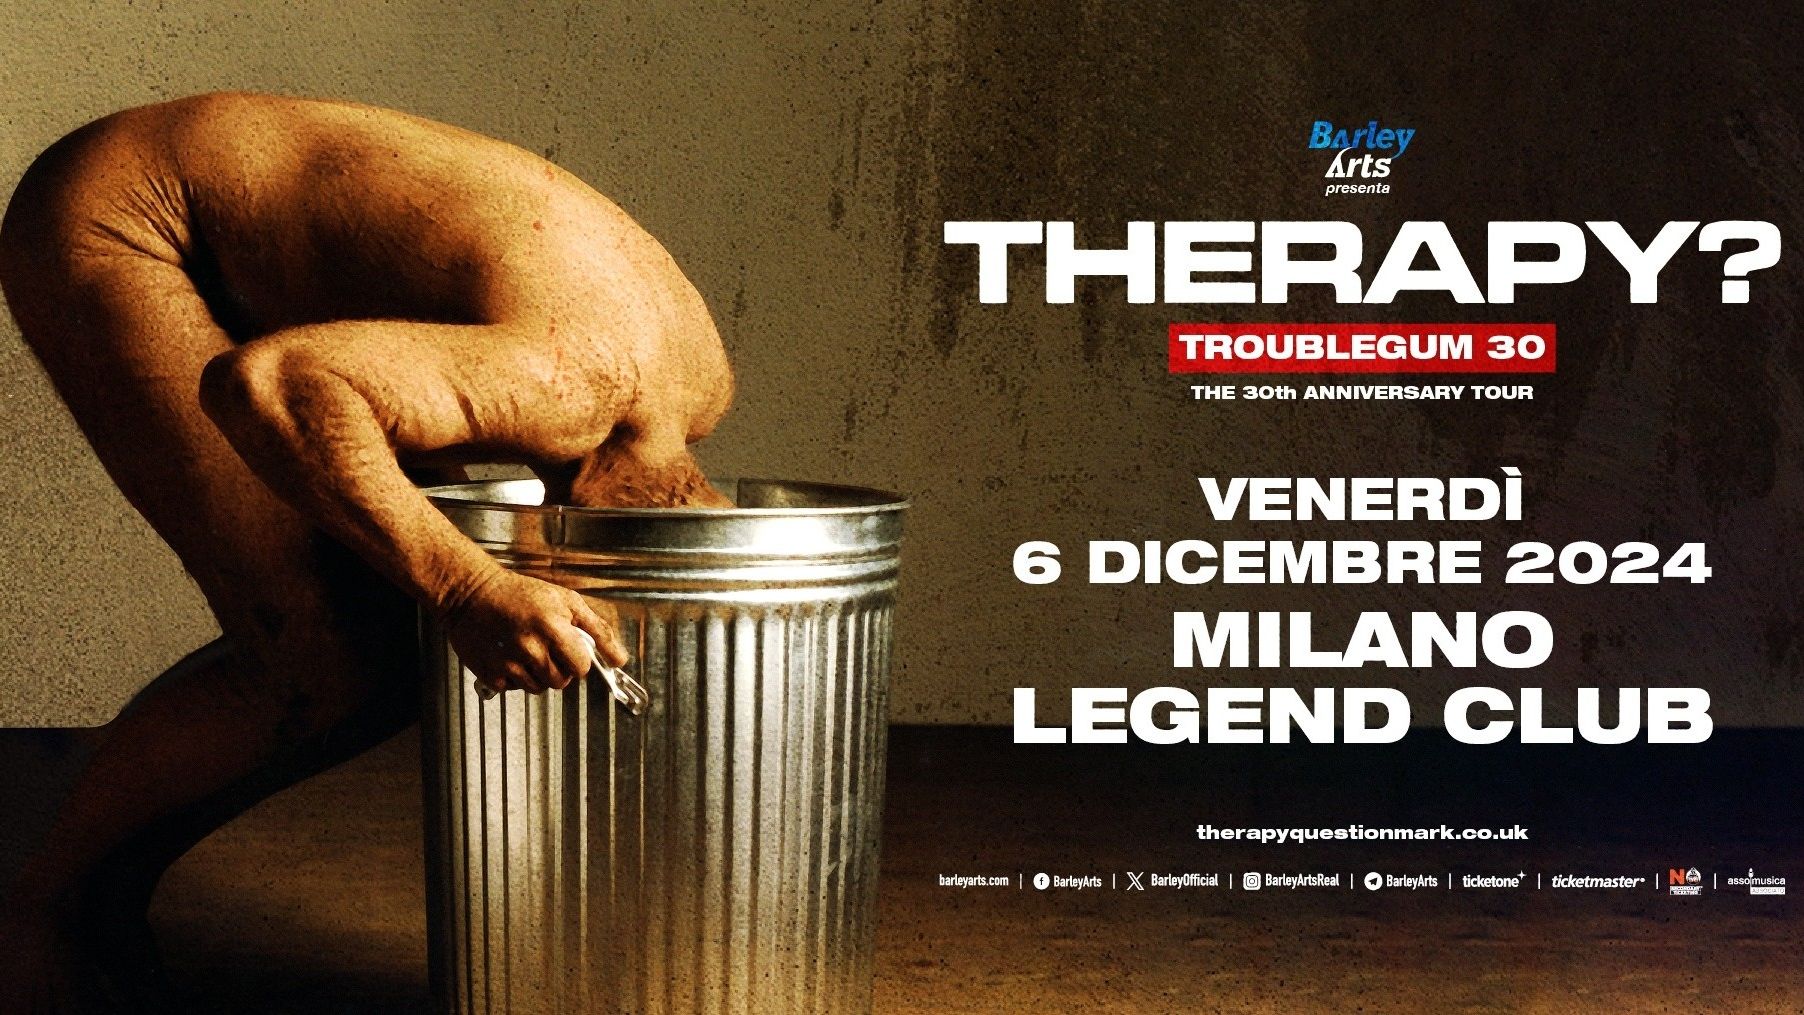 Therapy? - Troublegum 30 – The 30th Anniversary Tour